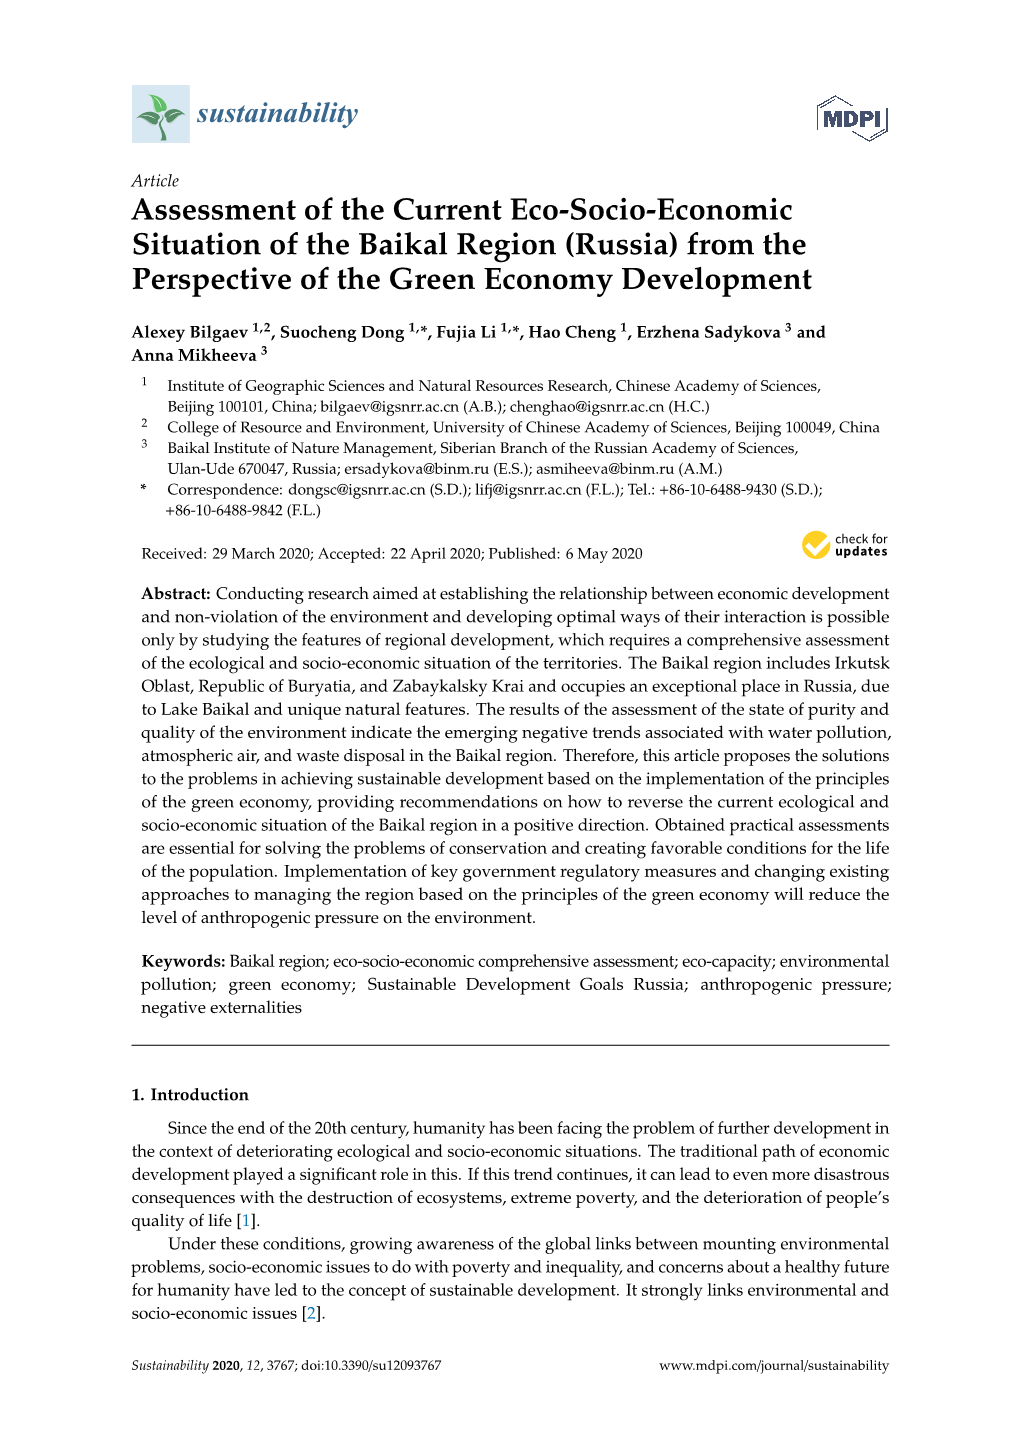 Assessment of the Current Eco-Socio-Economic Situation of the Baikal Region (Russia) from the Perspective of the Green Economy Development